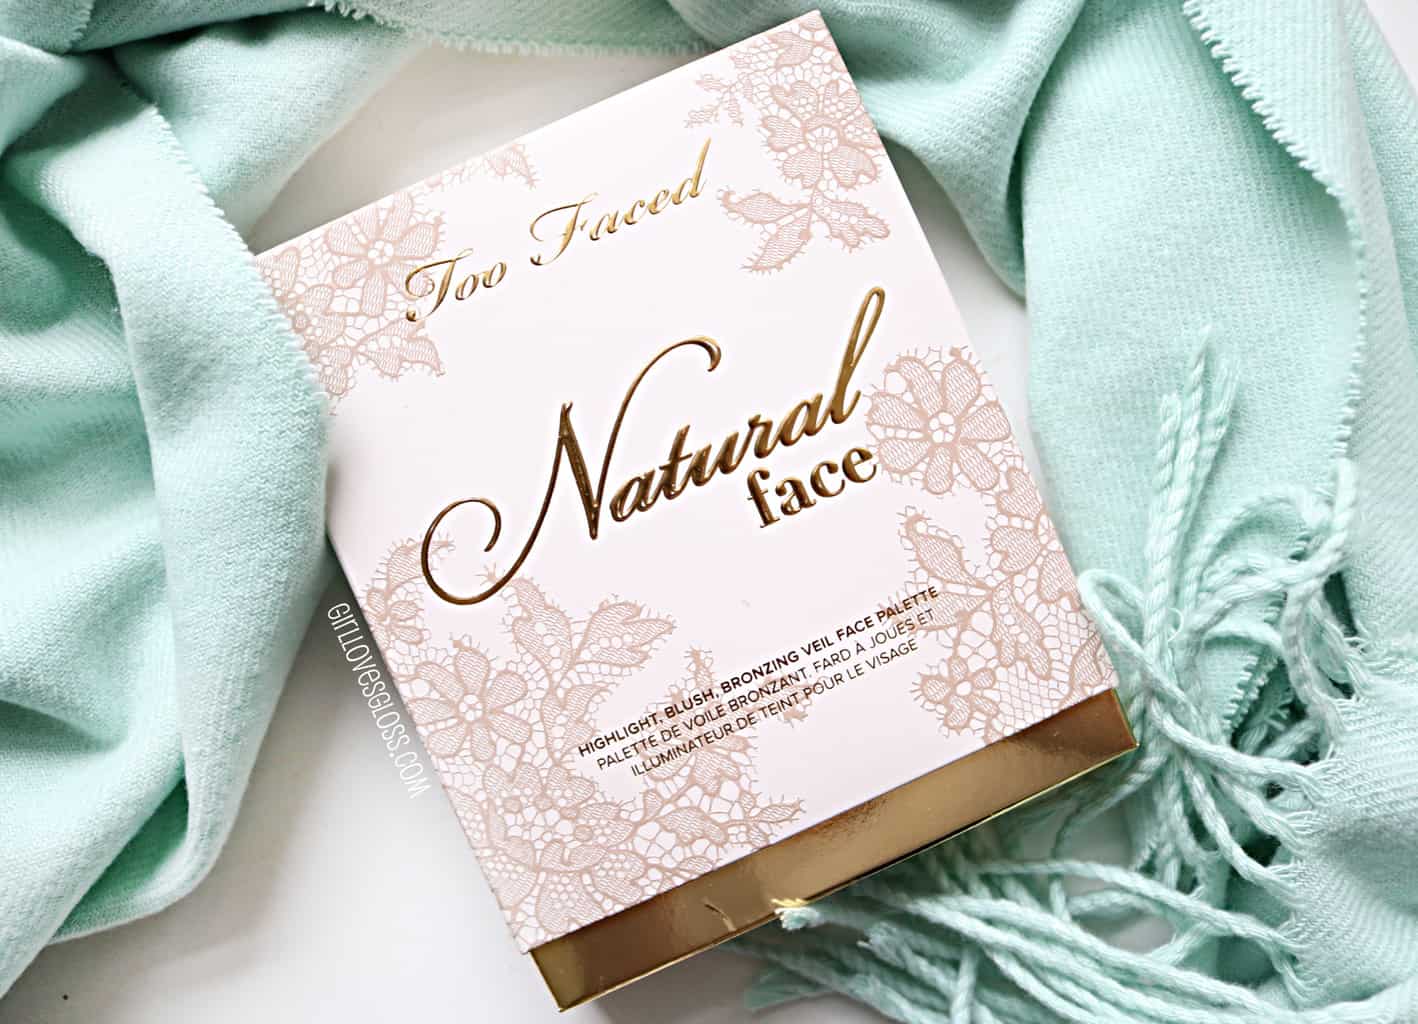 Too Faced Natural Face Palette Review and Swatches